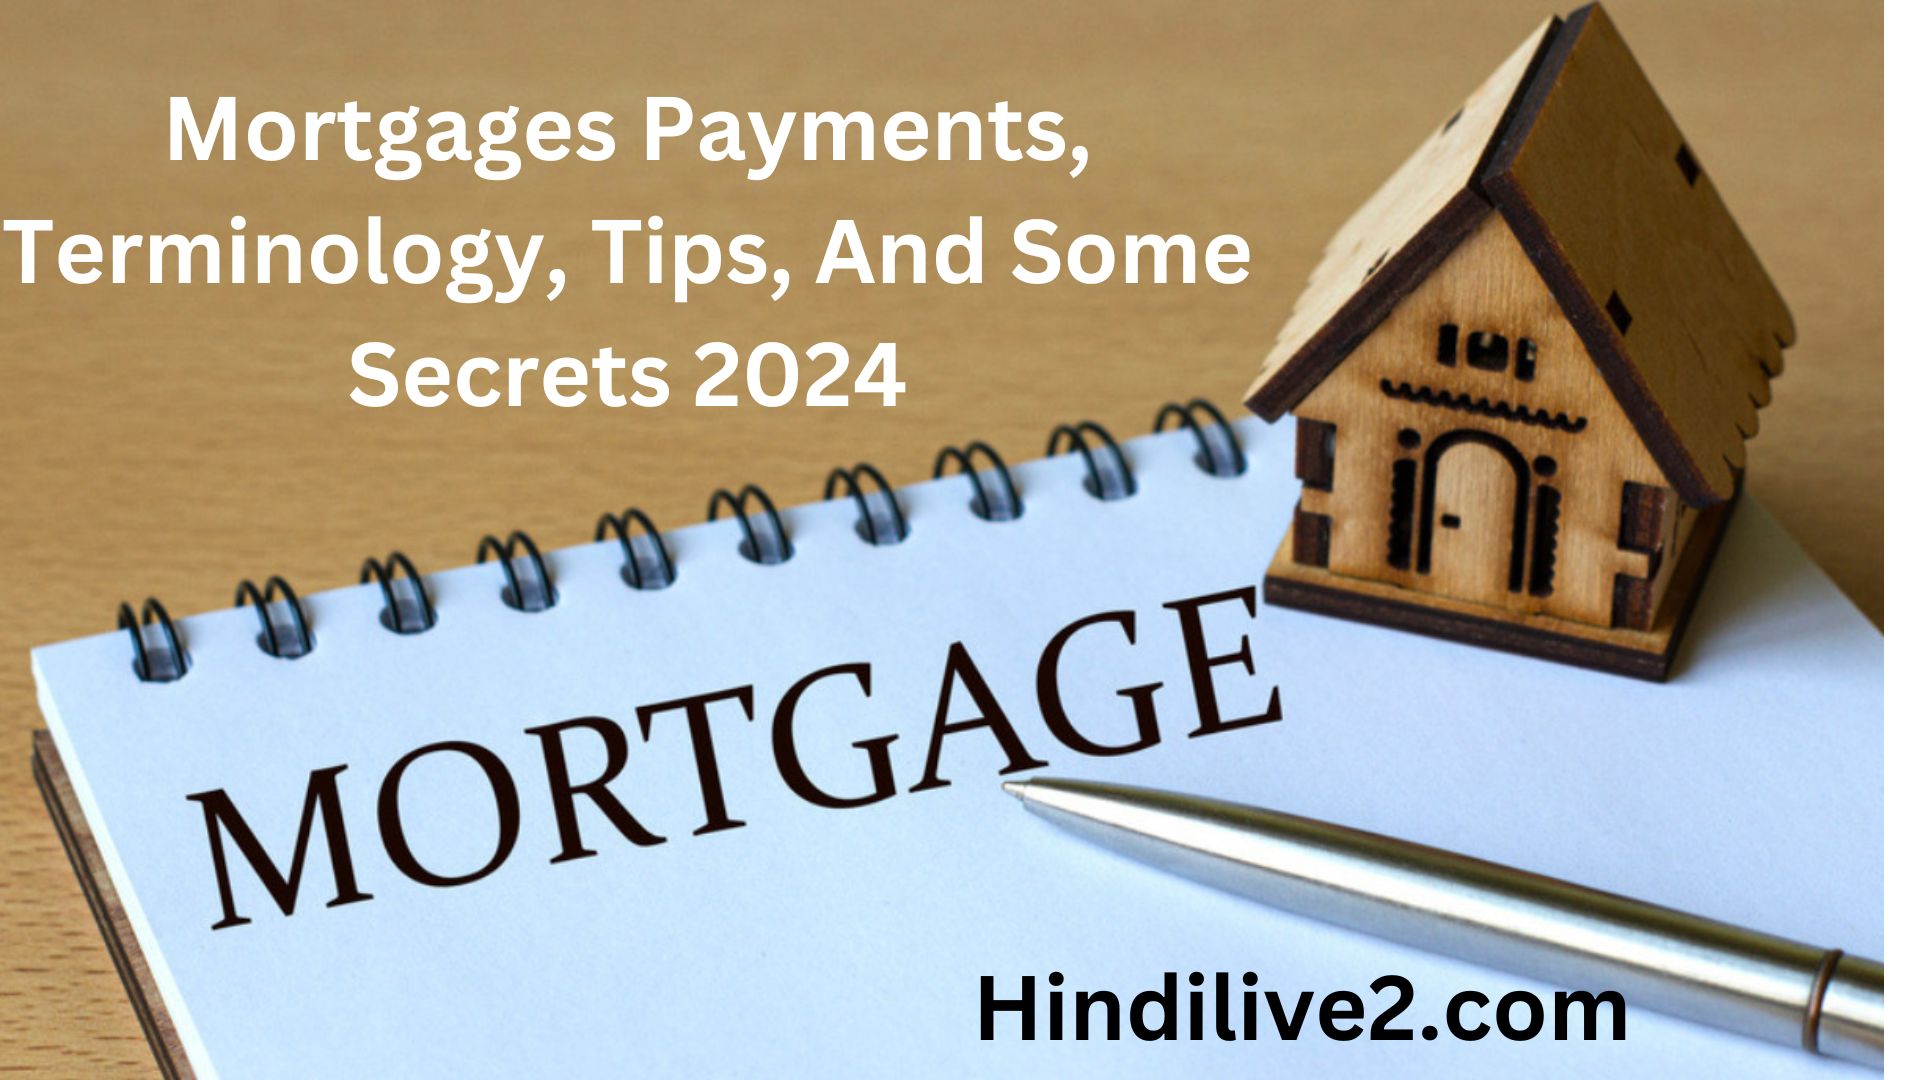 Mortgages Payments